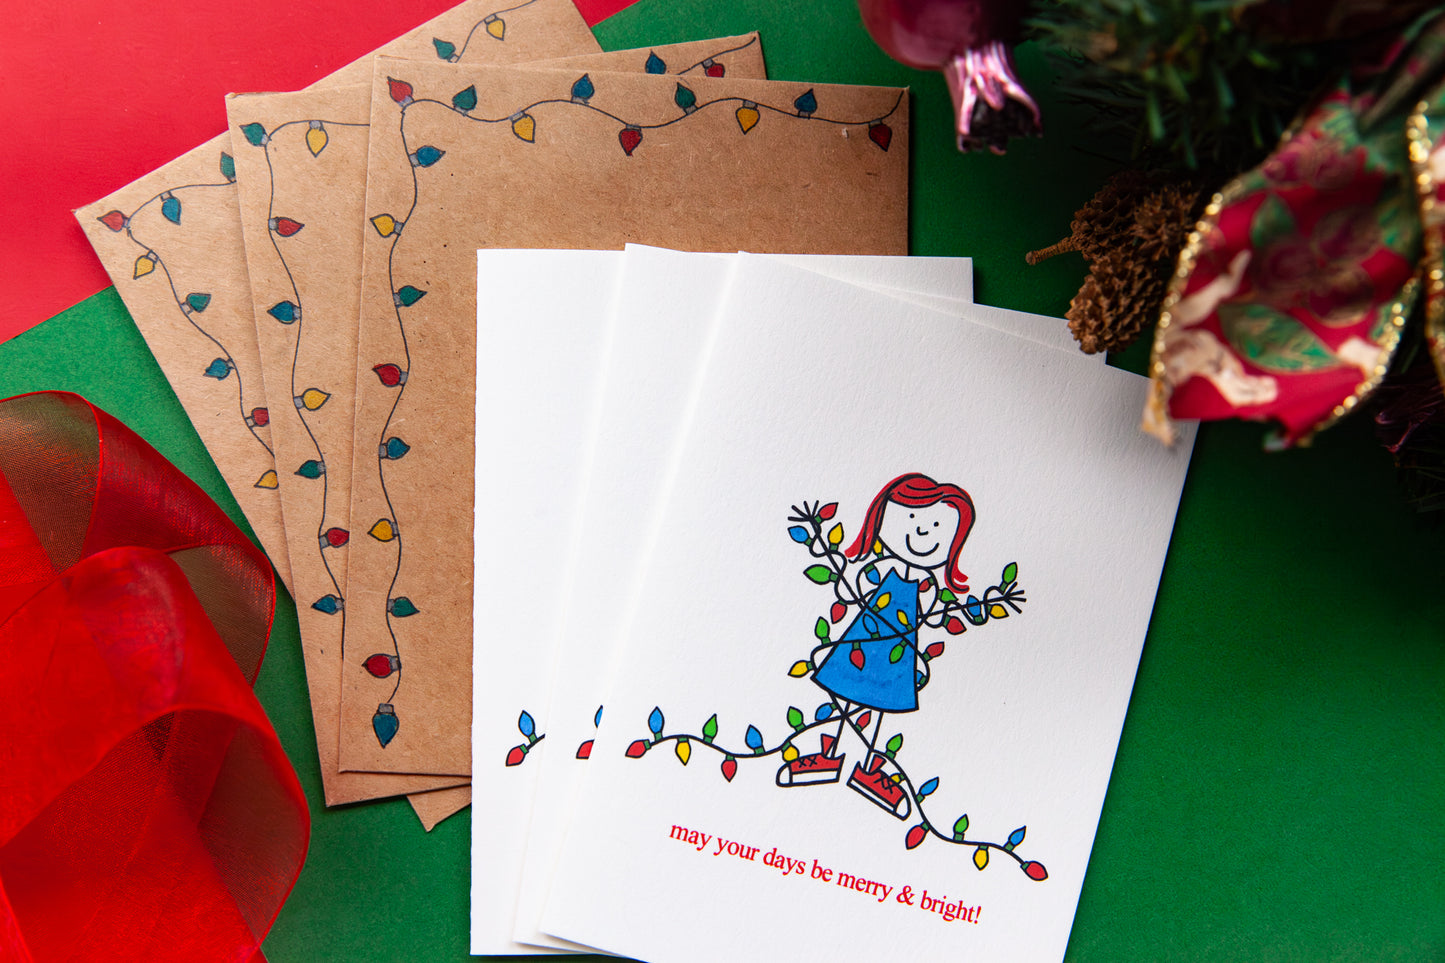 Special Edition Holiday Lights Card 3 Pack (Hand Illustrated Envelopes)